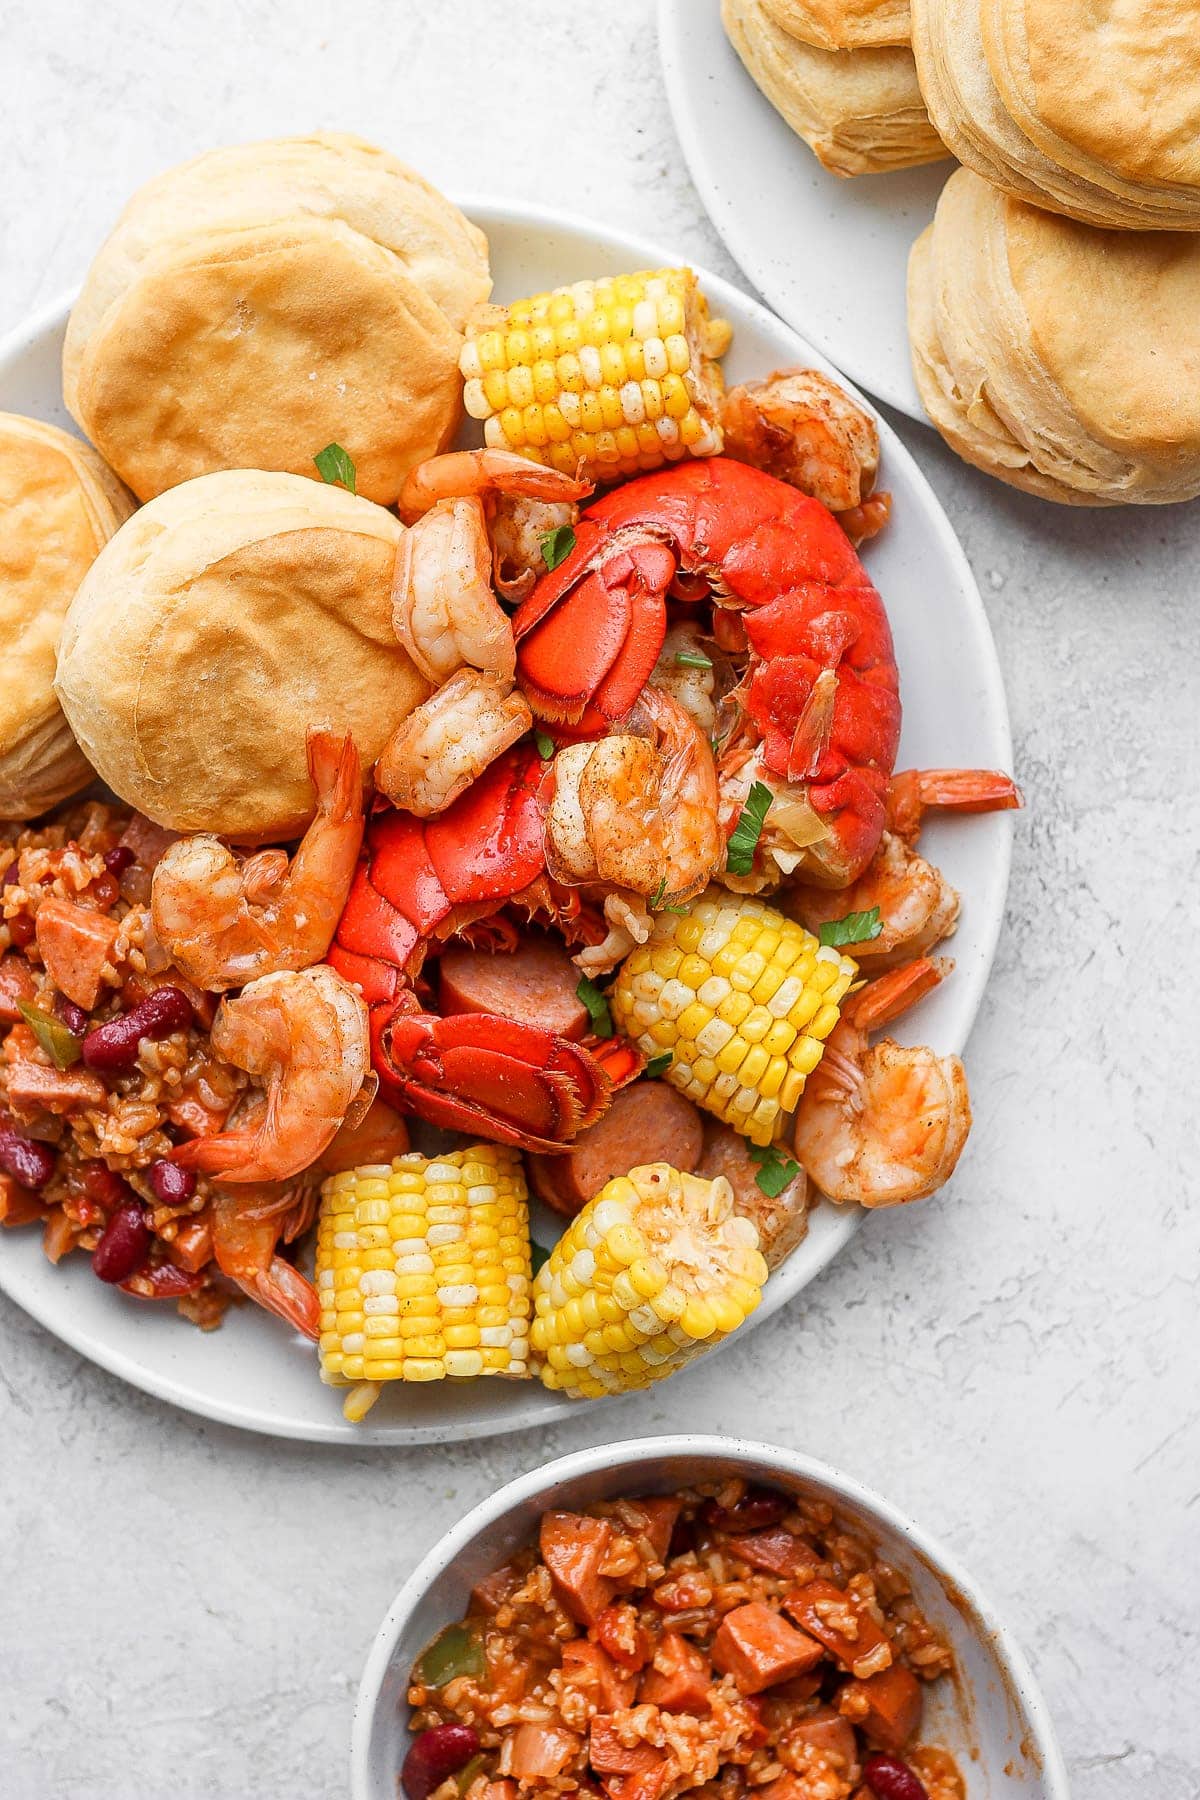 https://fitfoodiefinds.com/wp-content/uploads/2020/11/seafood-boil-22-1.jpg